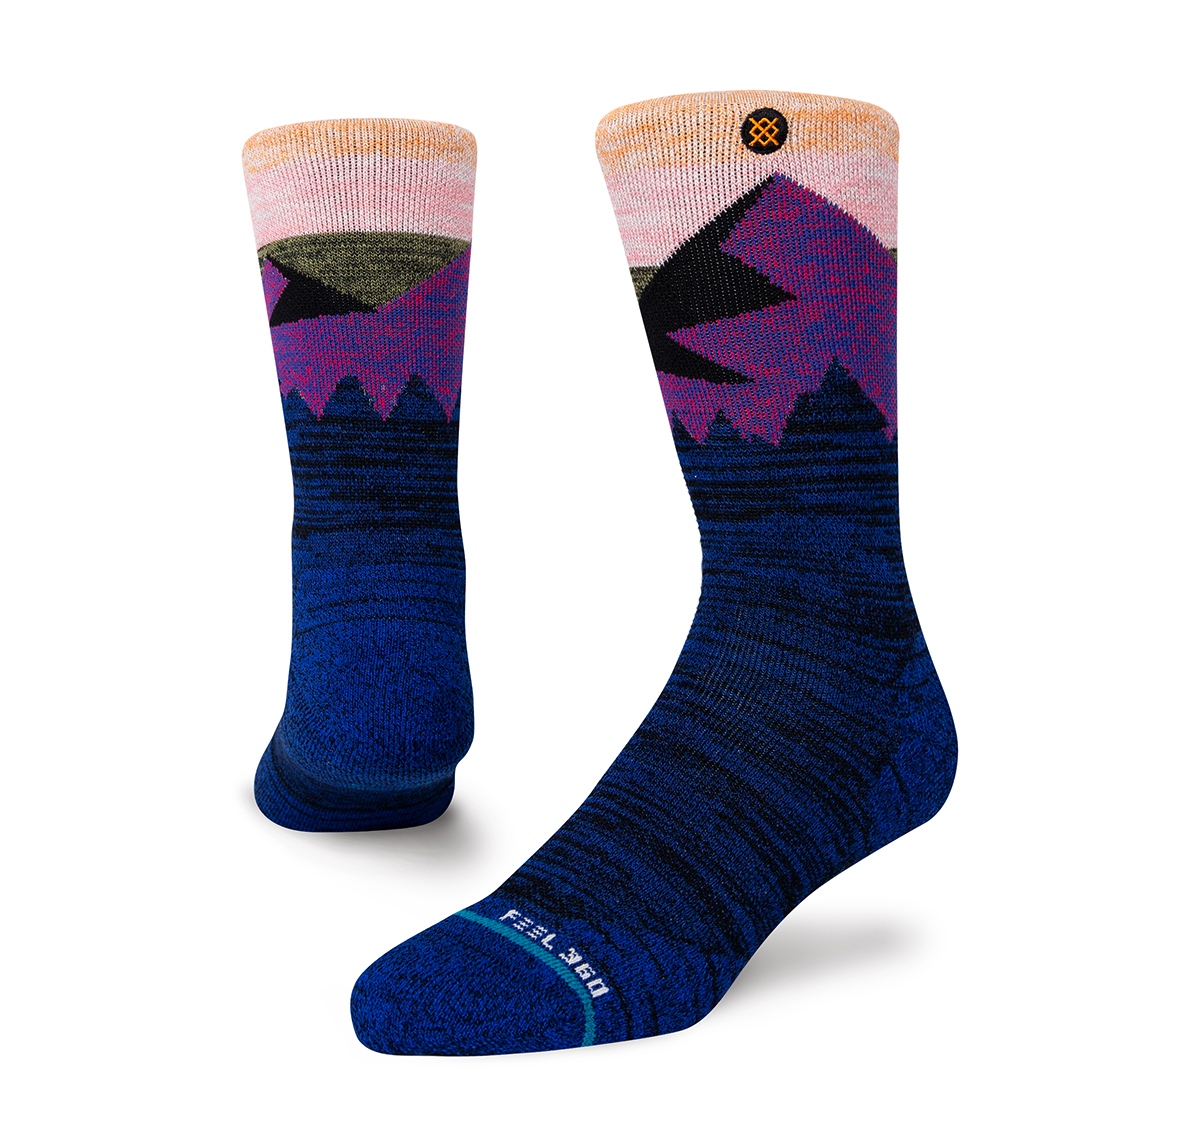 Stance Divide - Hike - InfiKnit - Multi pair